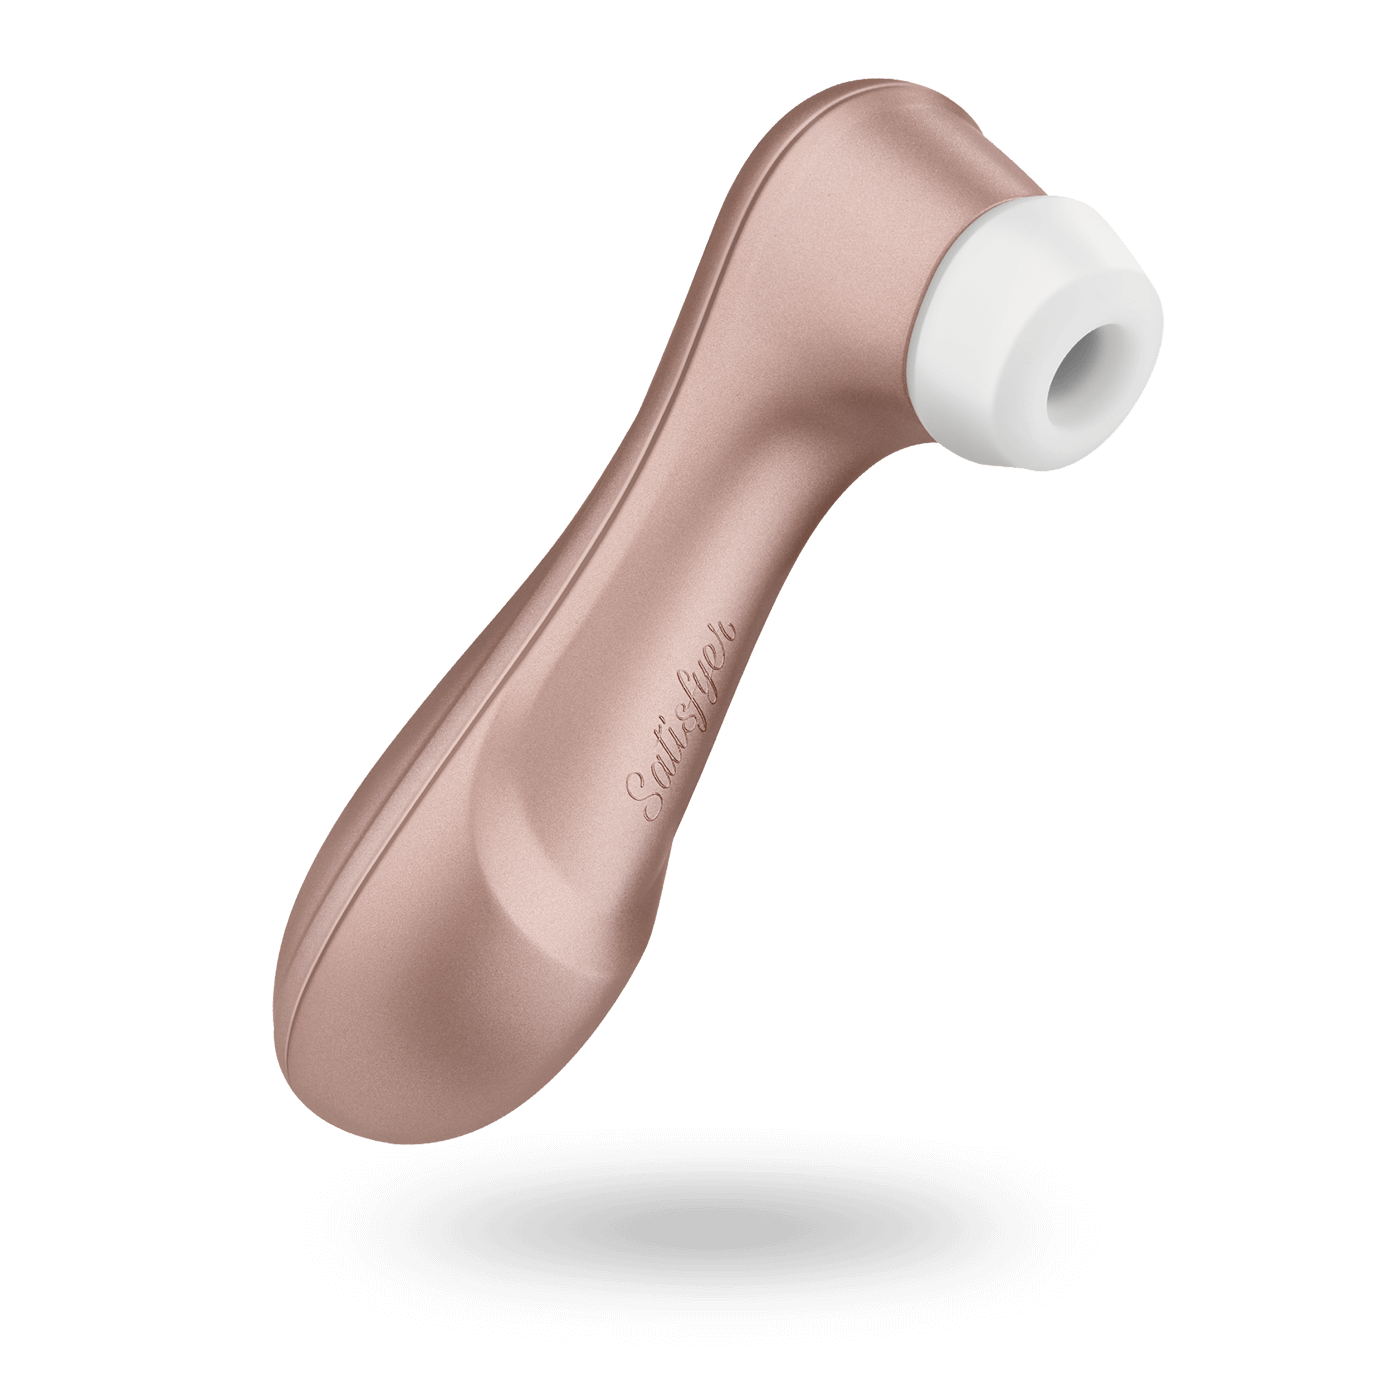  Satisfyer 2 Pro by Satisfyer - Product Review 